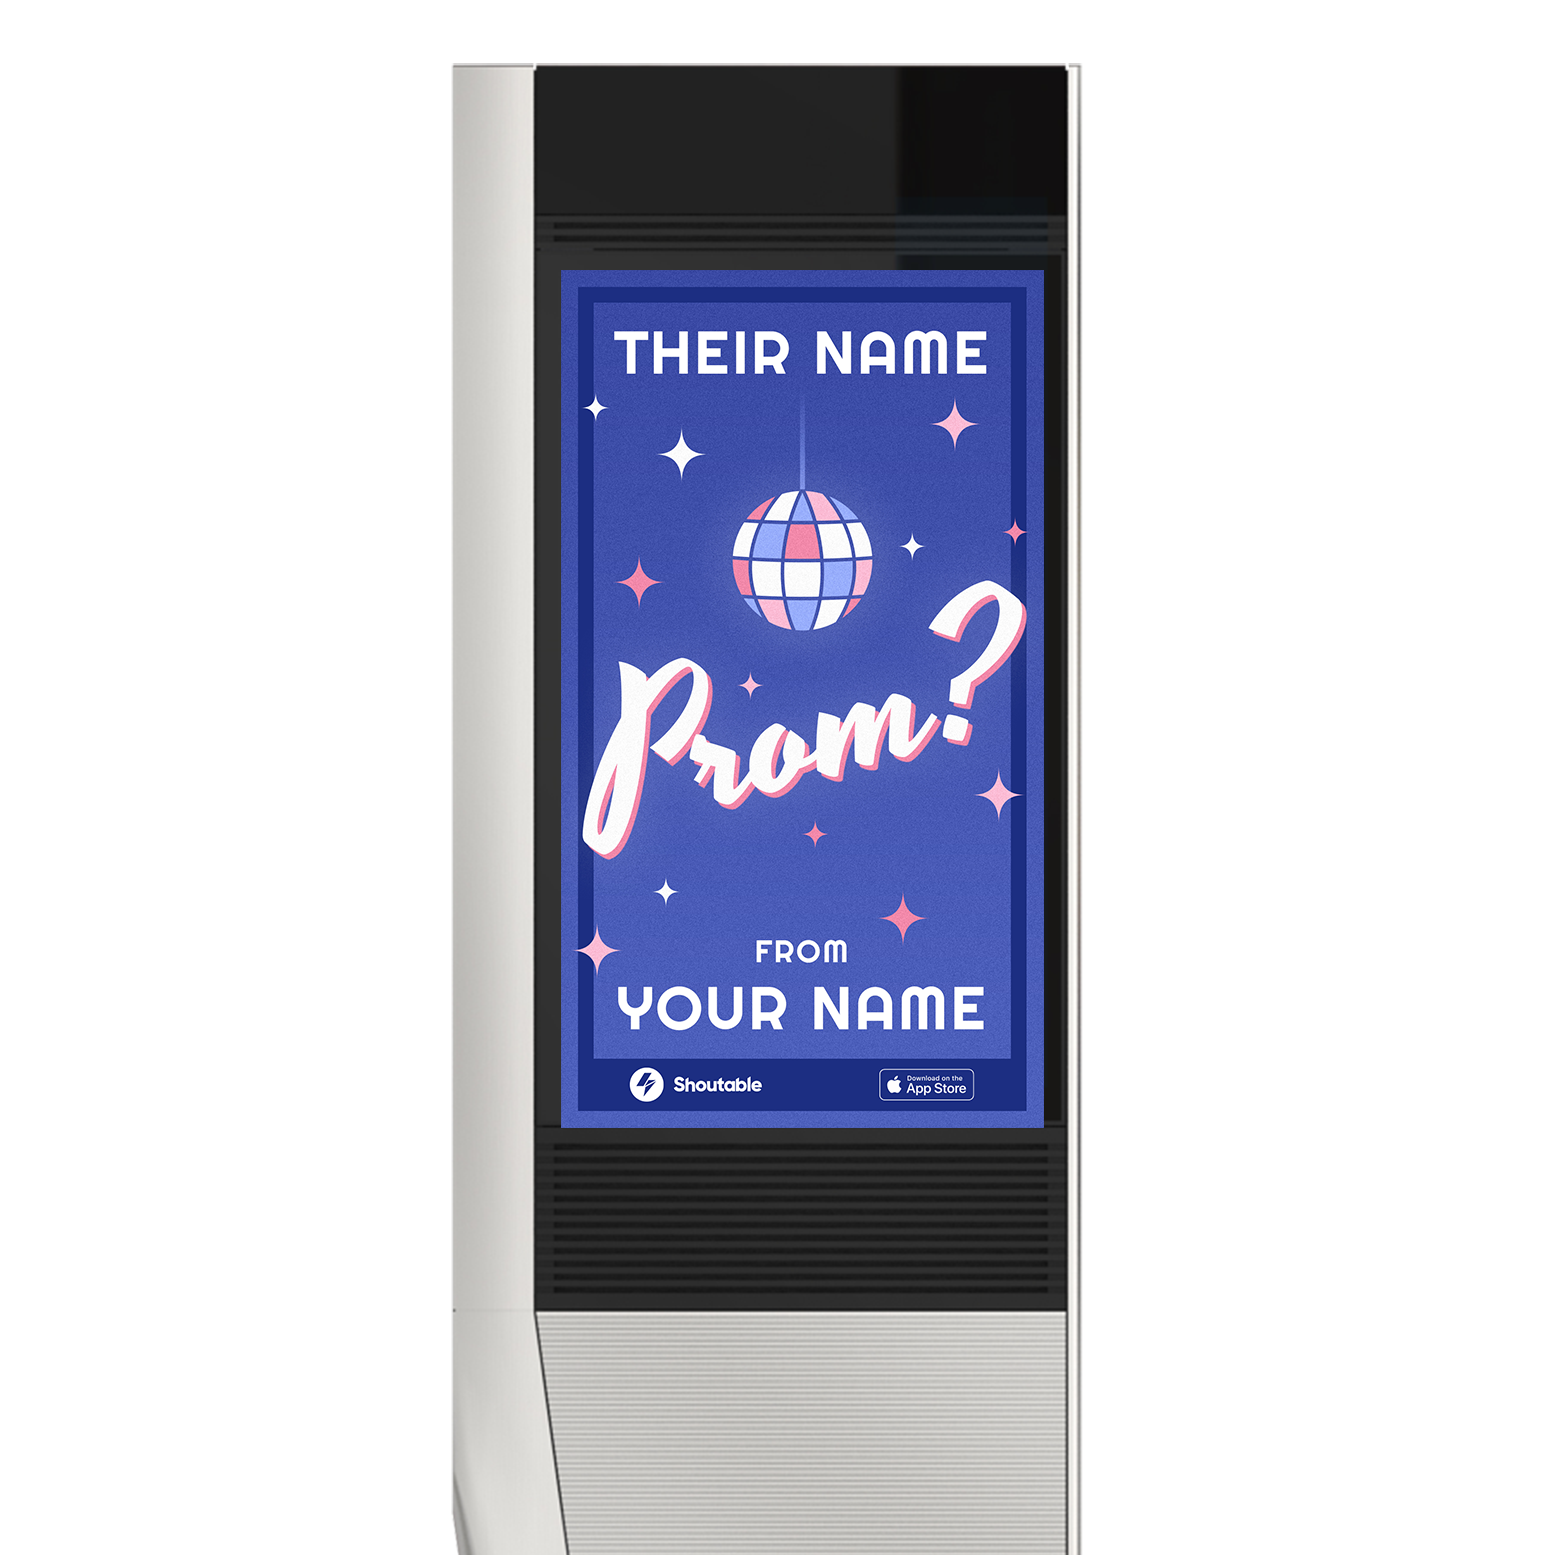 shoutable_mockup_prom.png